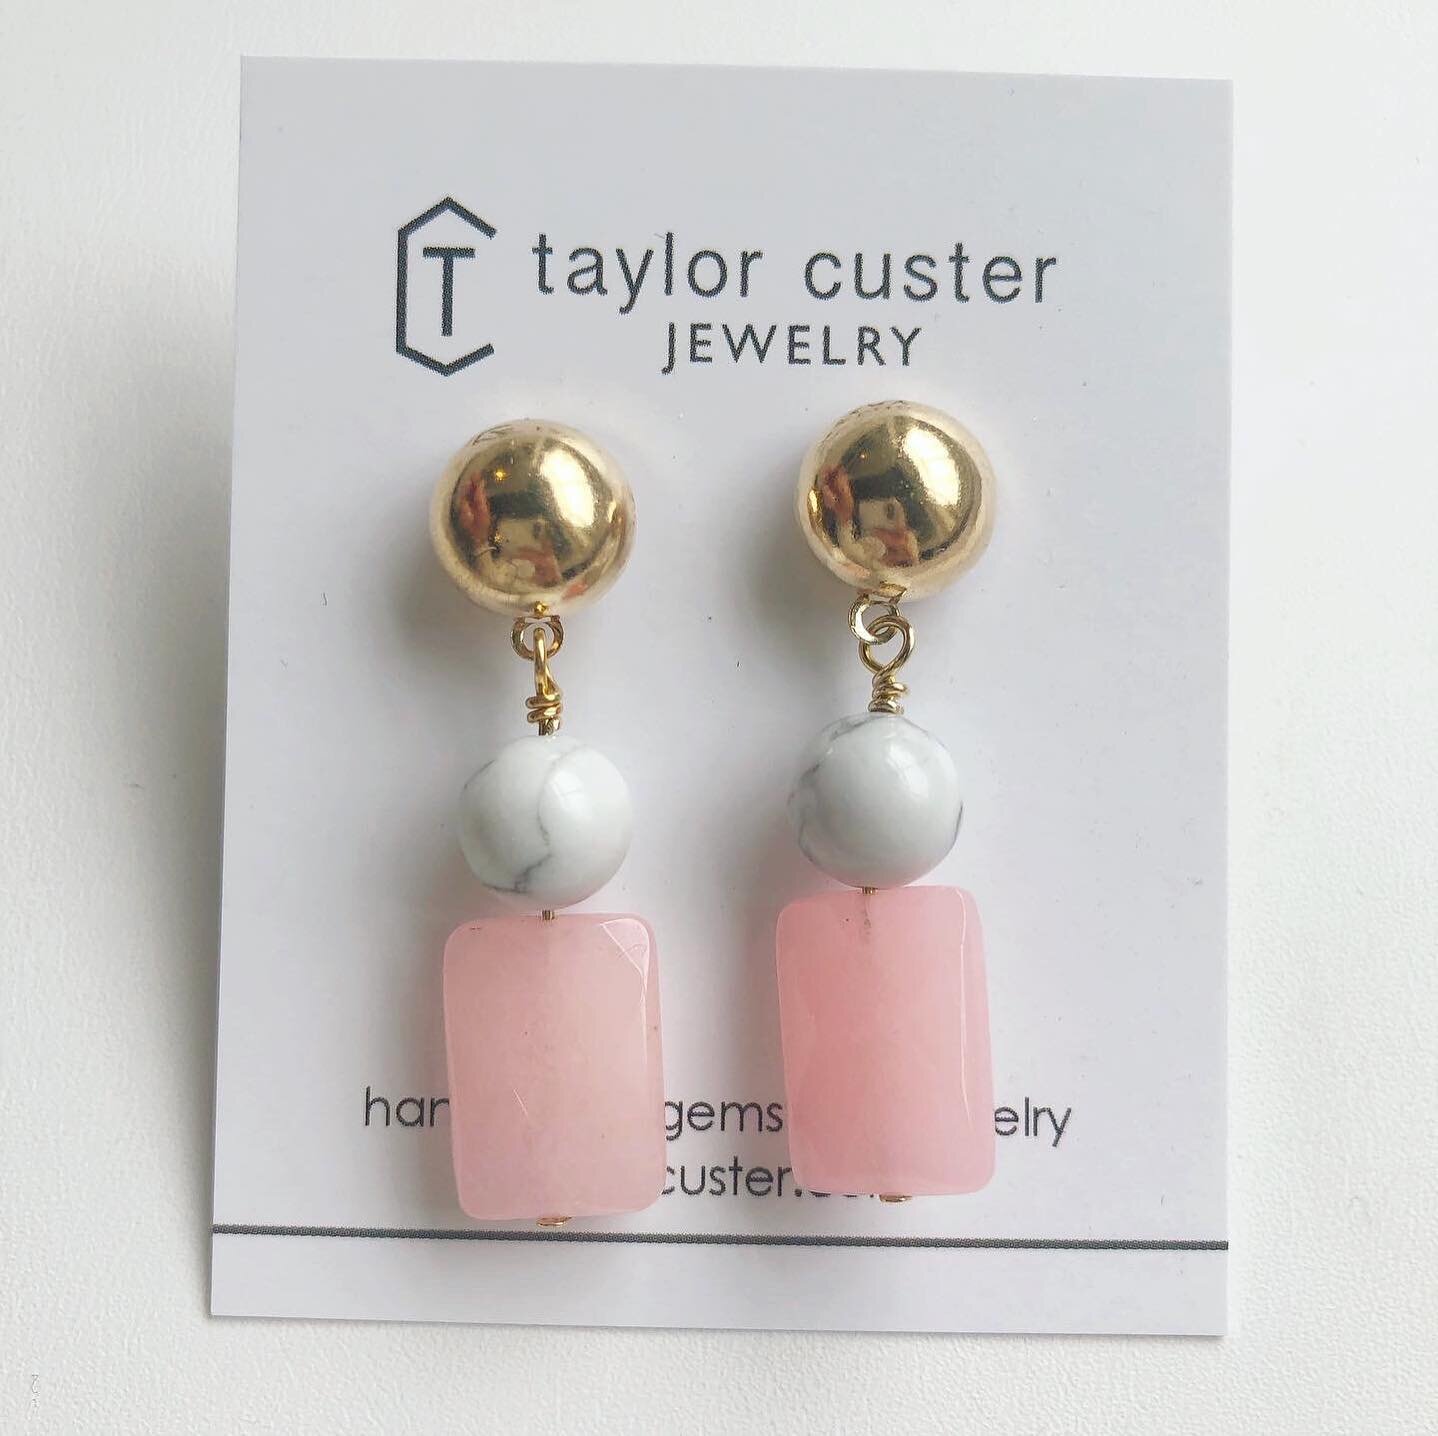 Dyed pink jade and howlite stone earrings. Ear posts are gold plated. $20. Comment sold to purchase.